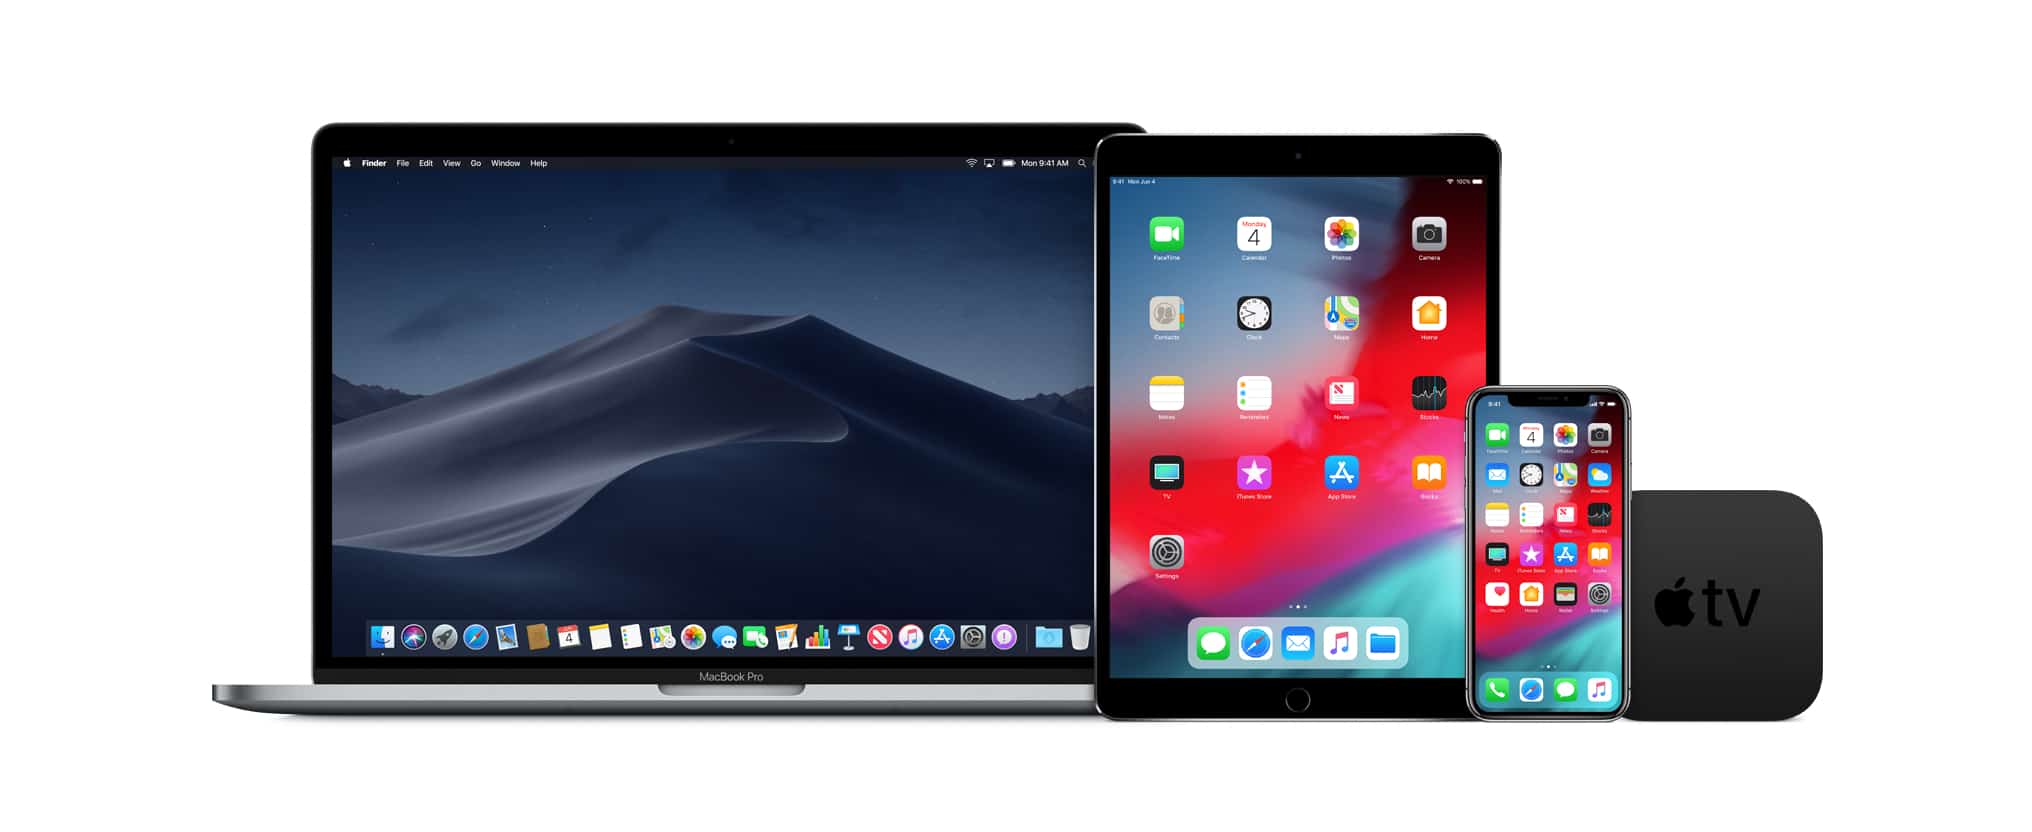 There are new iOS 12 beta versions for developers and the public, as the same is true for macOS Mojave.